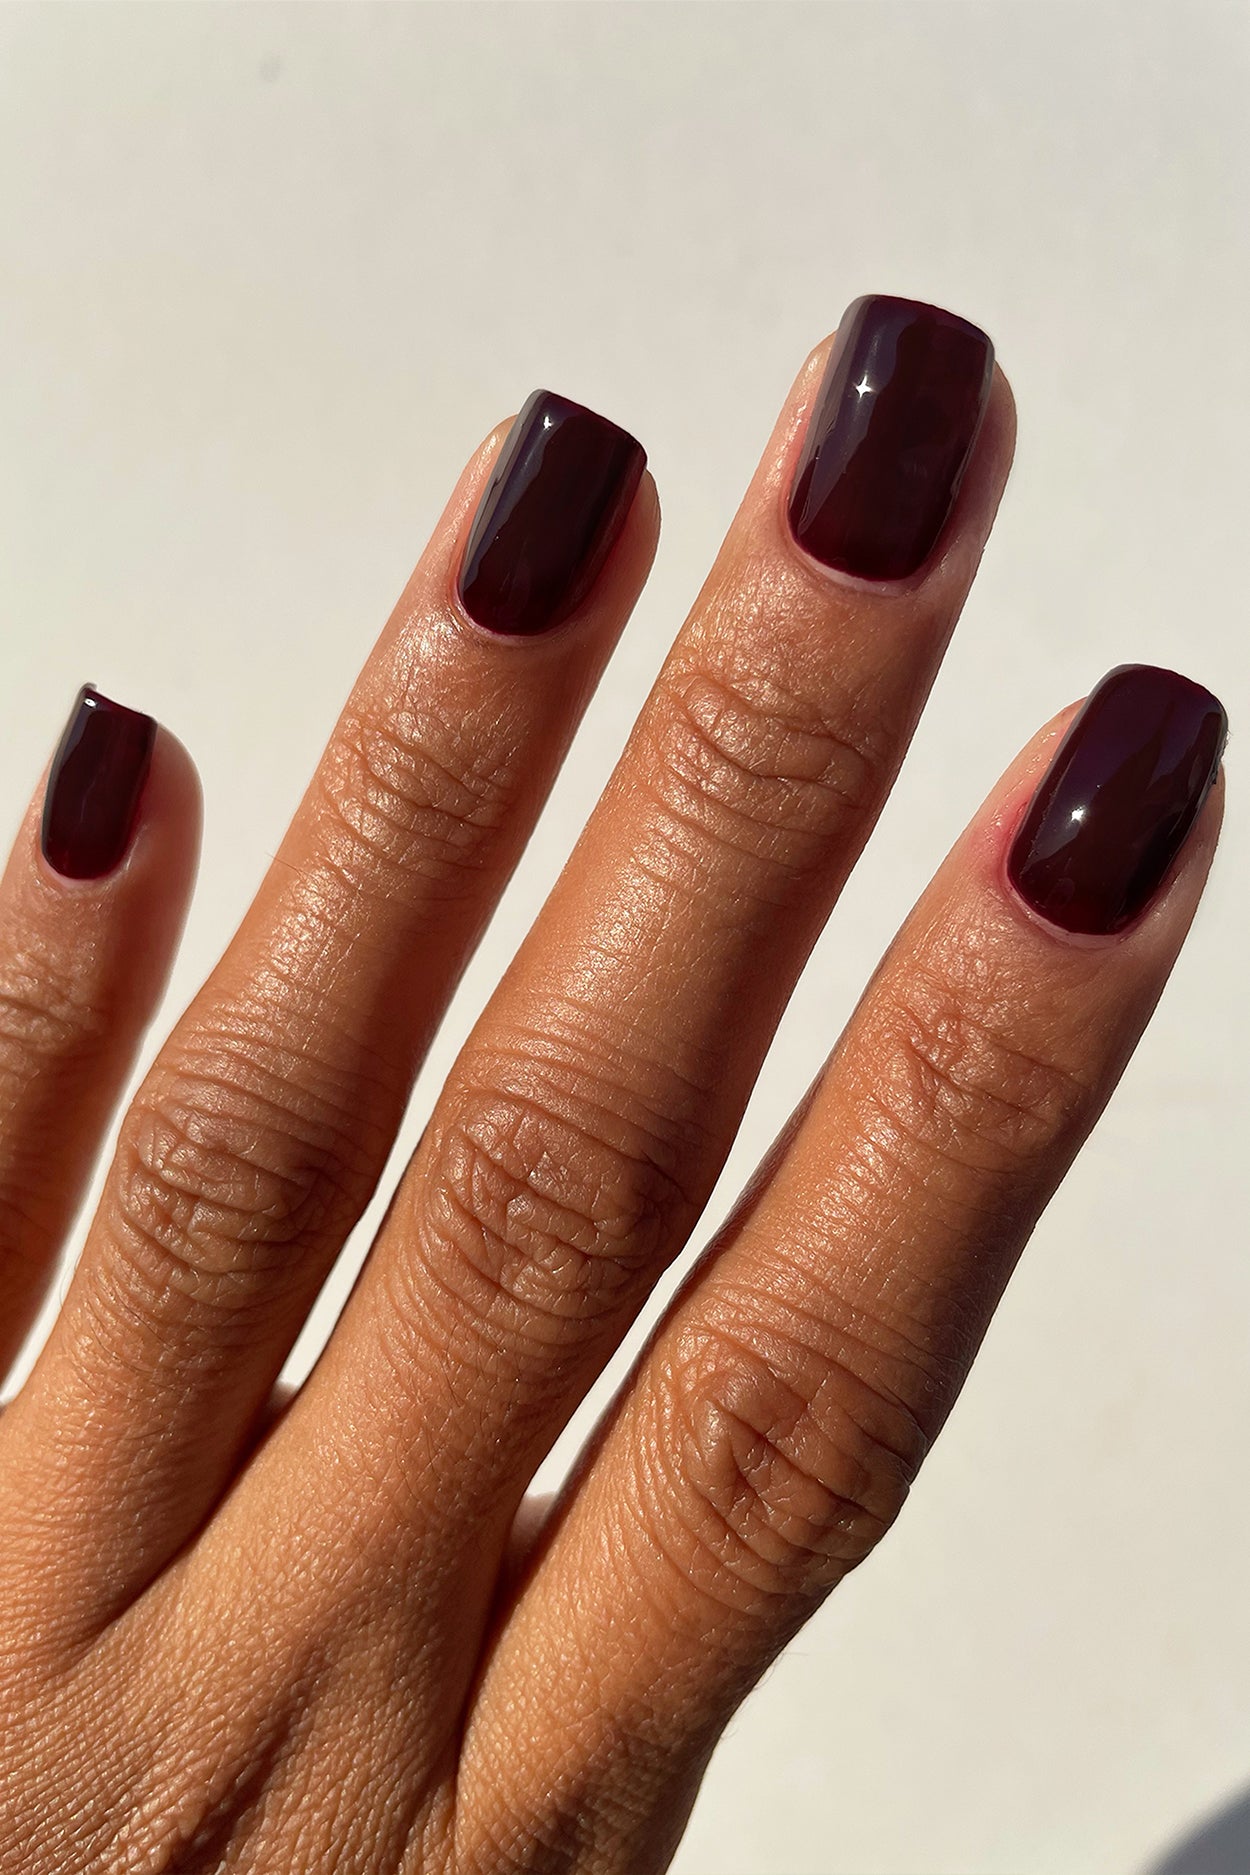 Bring The Dark Academia Aesthetic To Your Fingertips With Your Next Manicure